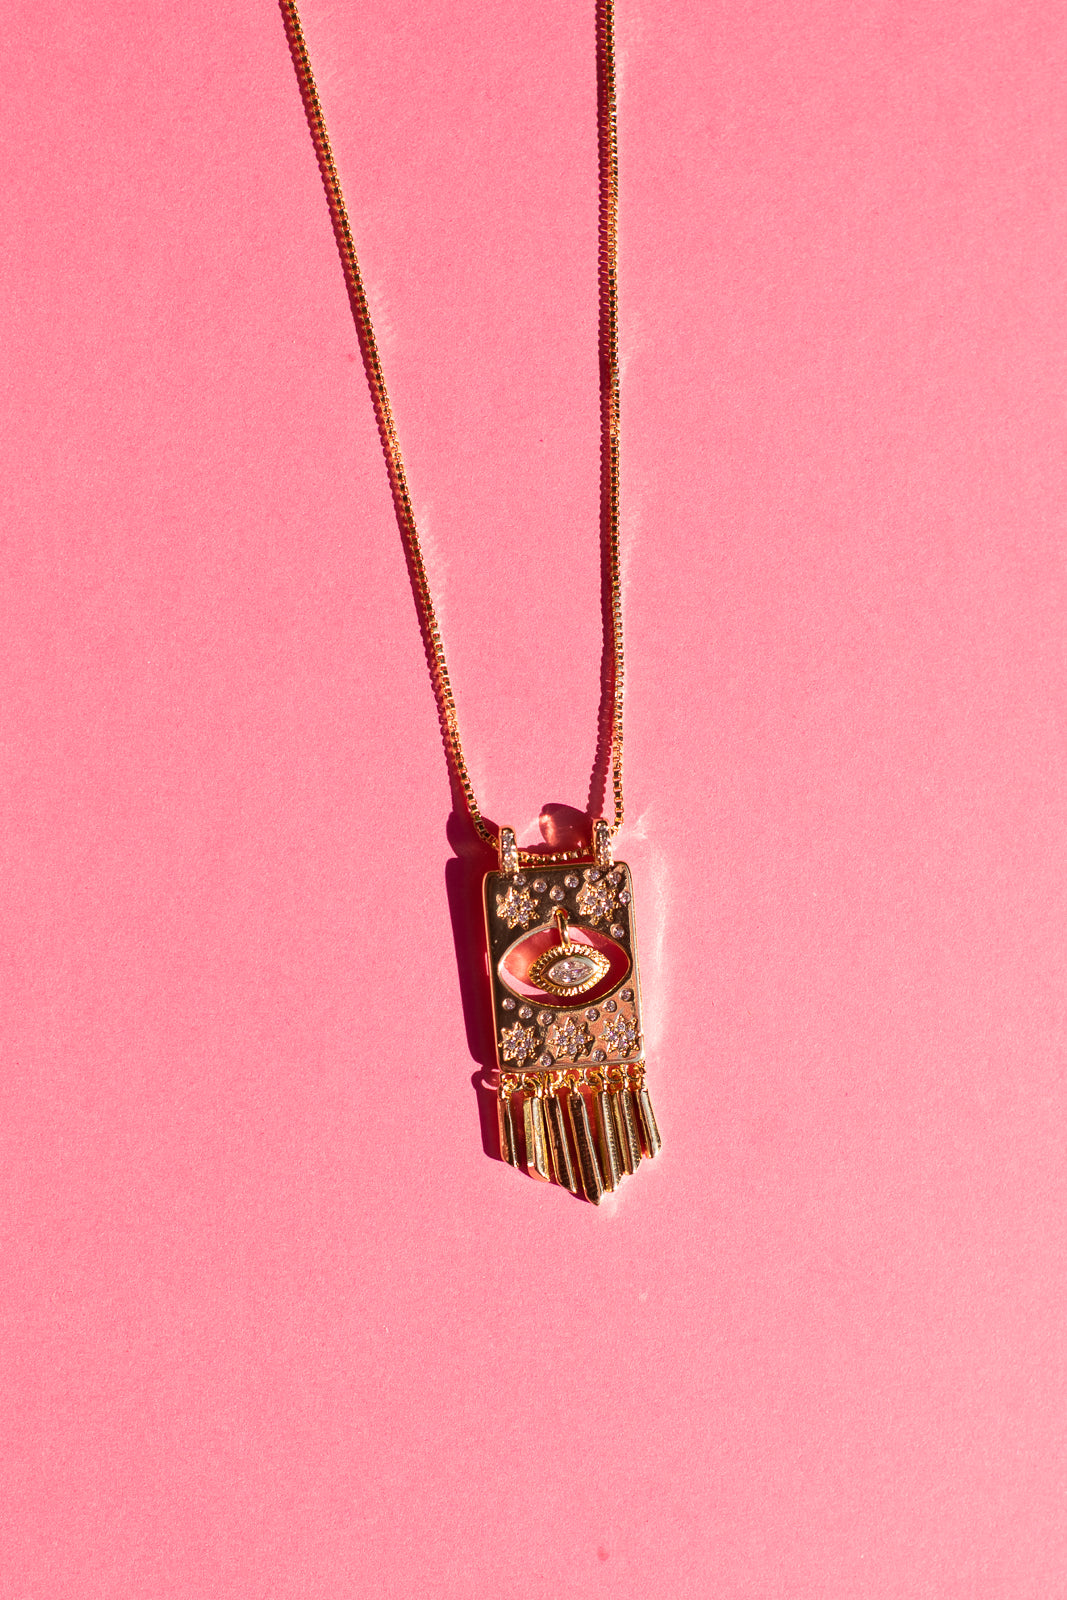 The Third Eye Fringed Pendant Necklace *GOLD FILLED*